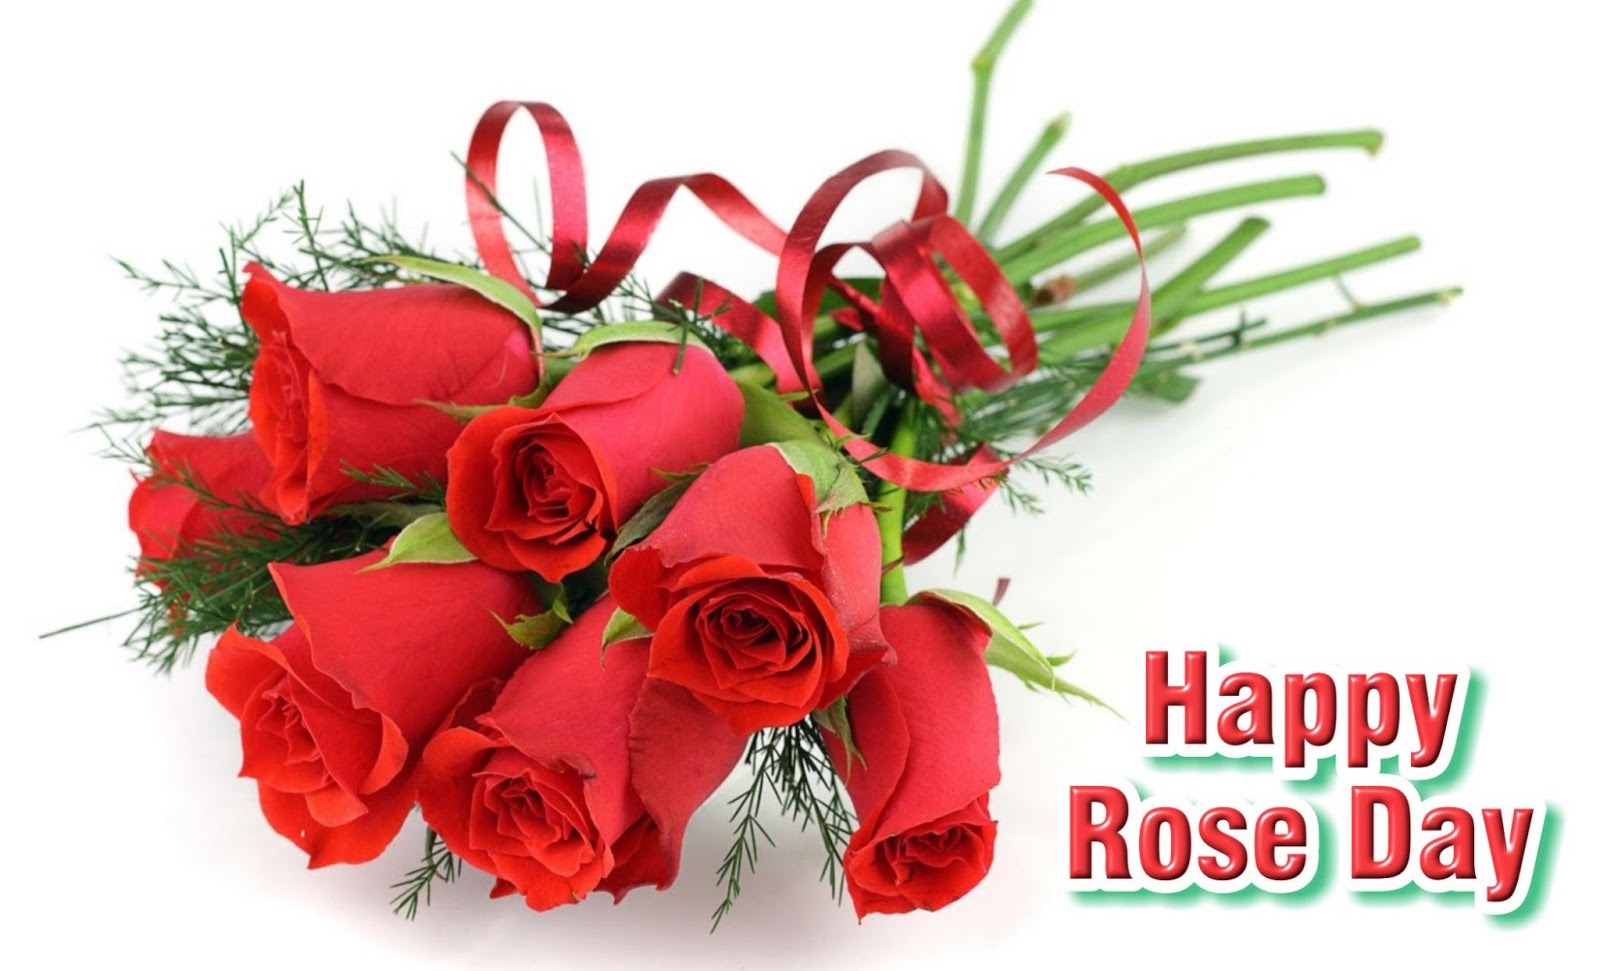 Red Roses Wallpapers For Rose Day - Happy Rose Day 2019 Hd - HD Wallpaper 